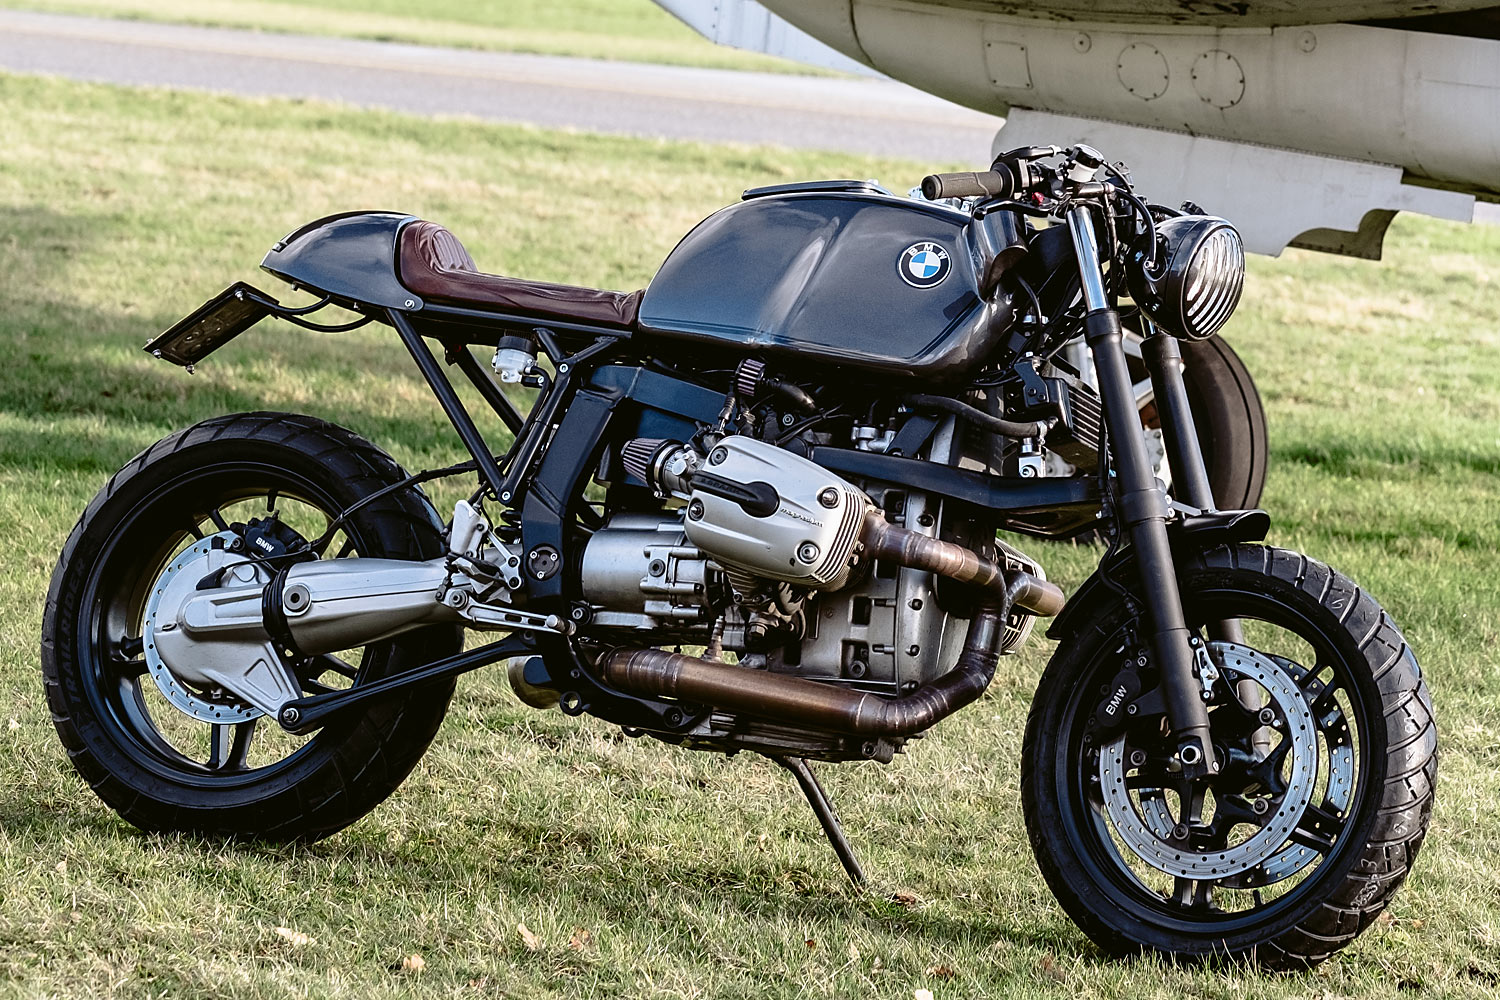 The Beast' Bmw R1100S Cafe Racer - Moto Adonis - Pipeburn